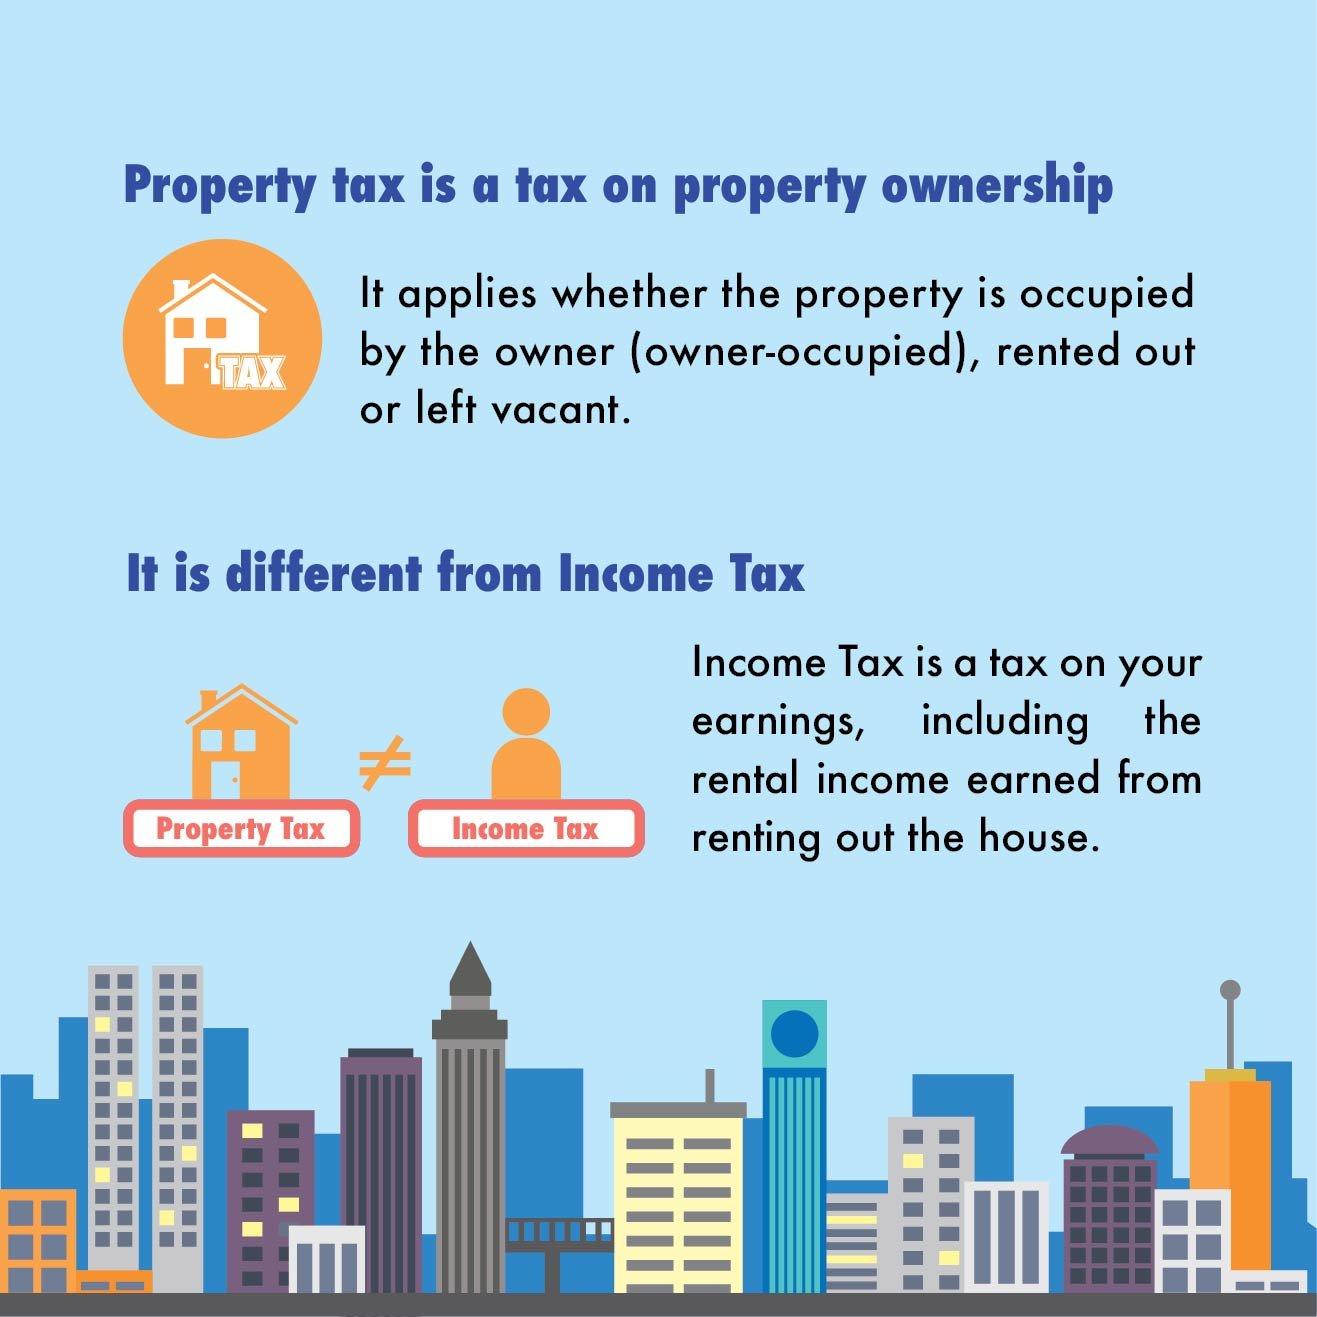 Property tax is a tax on property ownership. It is different from Income Tax.